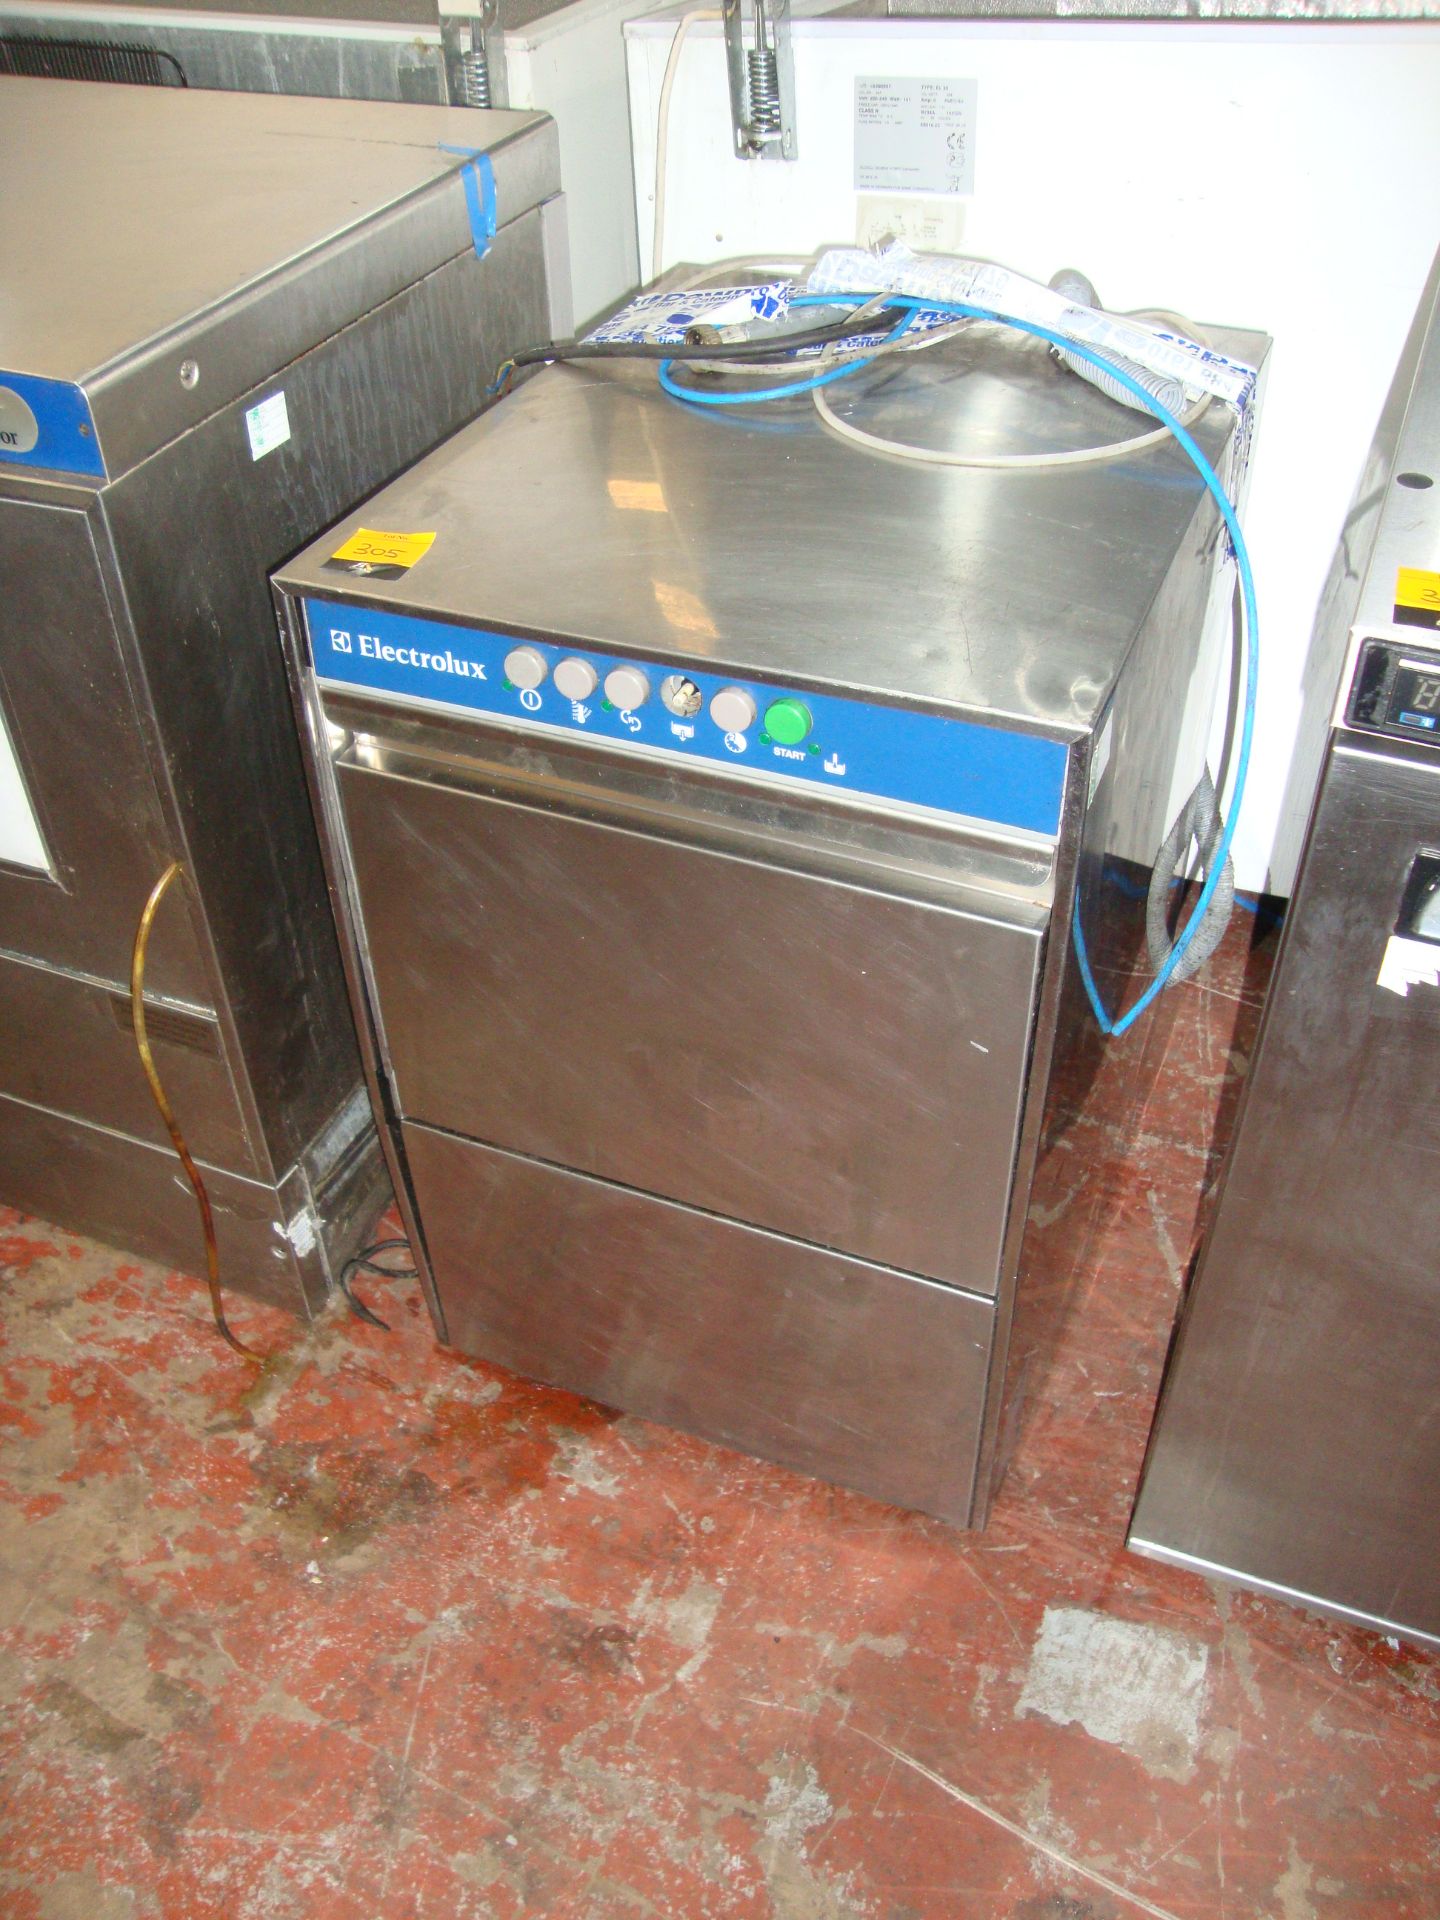 Electrolux stainless steel glass washerIMPORTANT: Please remember goods successfully bid upon must